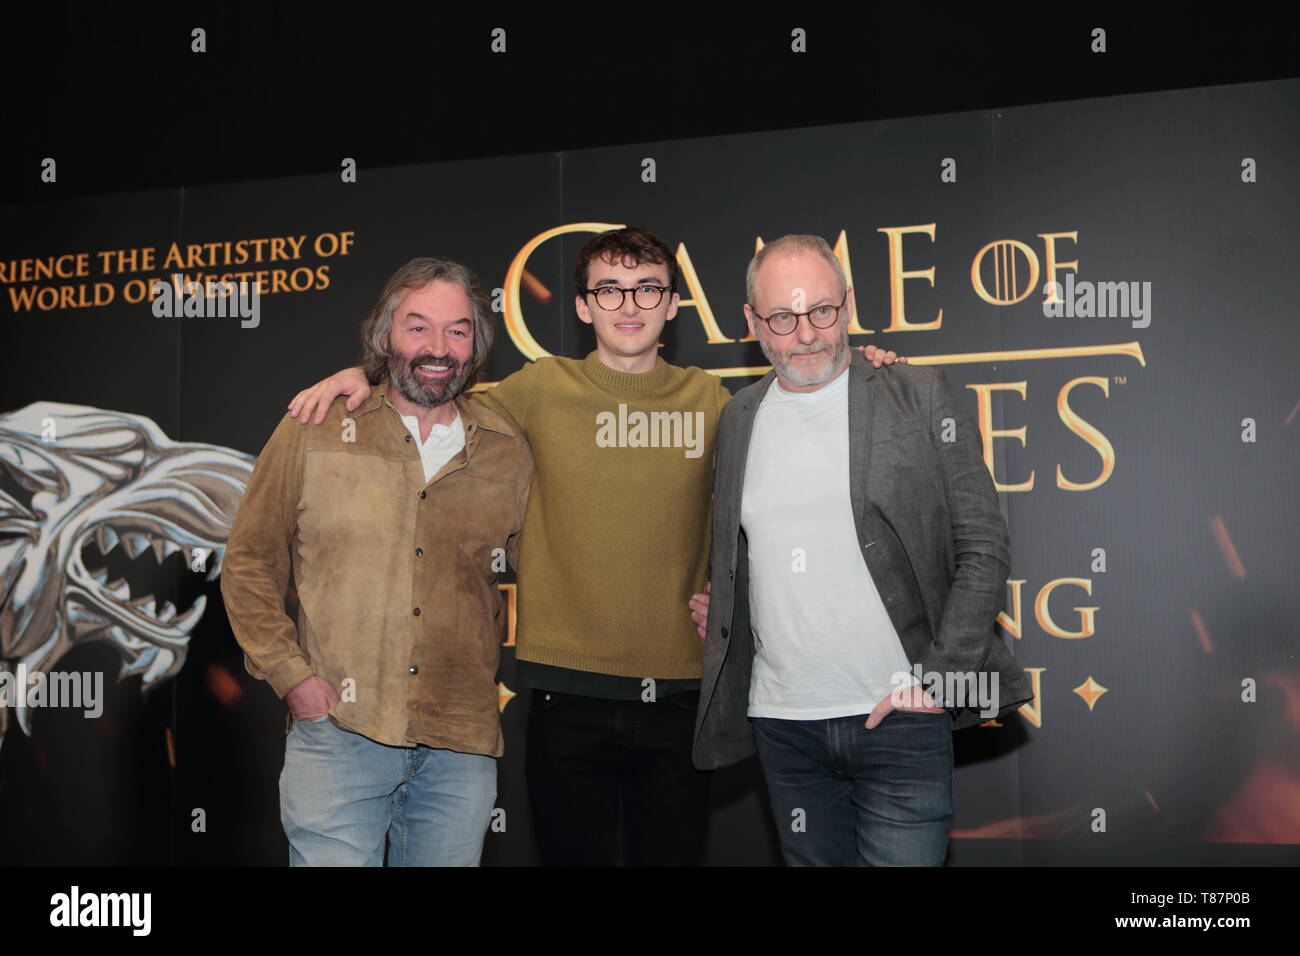 'Game of Thrones’ stars open the GAME OF THRONES: The Touring Exhibition at TEC Belfast   Featuring: Isaac Hempstead Wright, Ian Beattie, Liam Cunningham Where: Belfast N Ireland, United Kingdom When: 10 Apr 2019 Credit: WENN.com Stock Photo